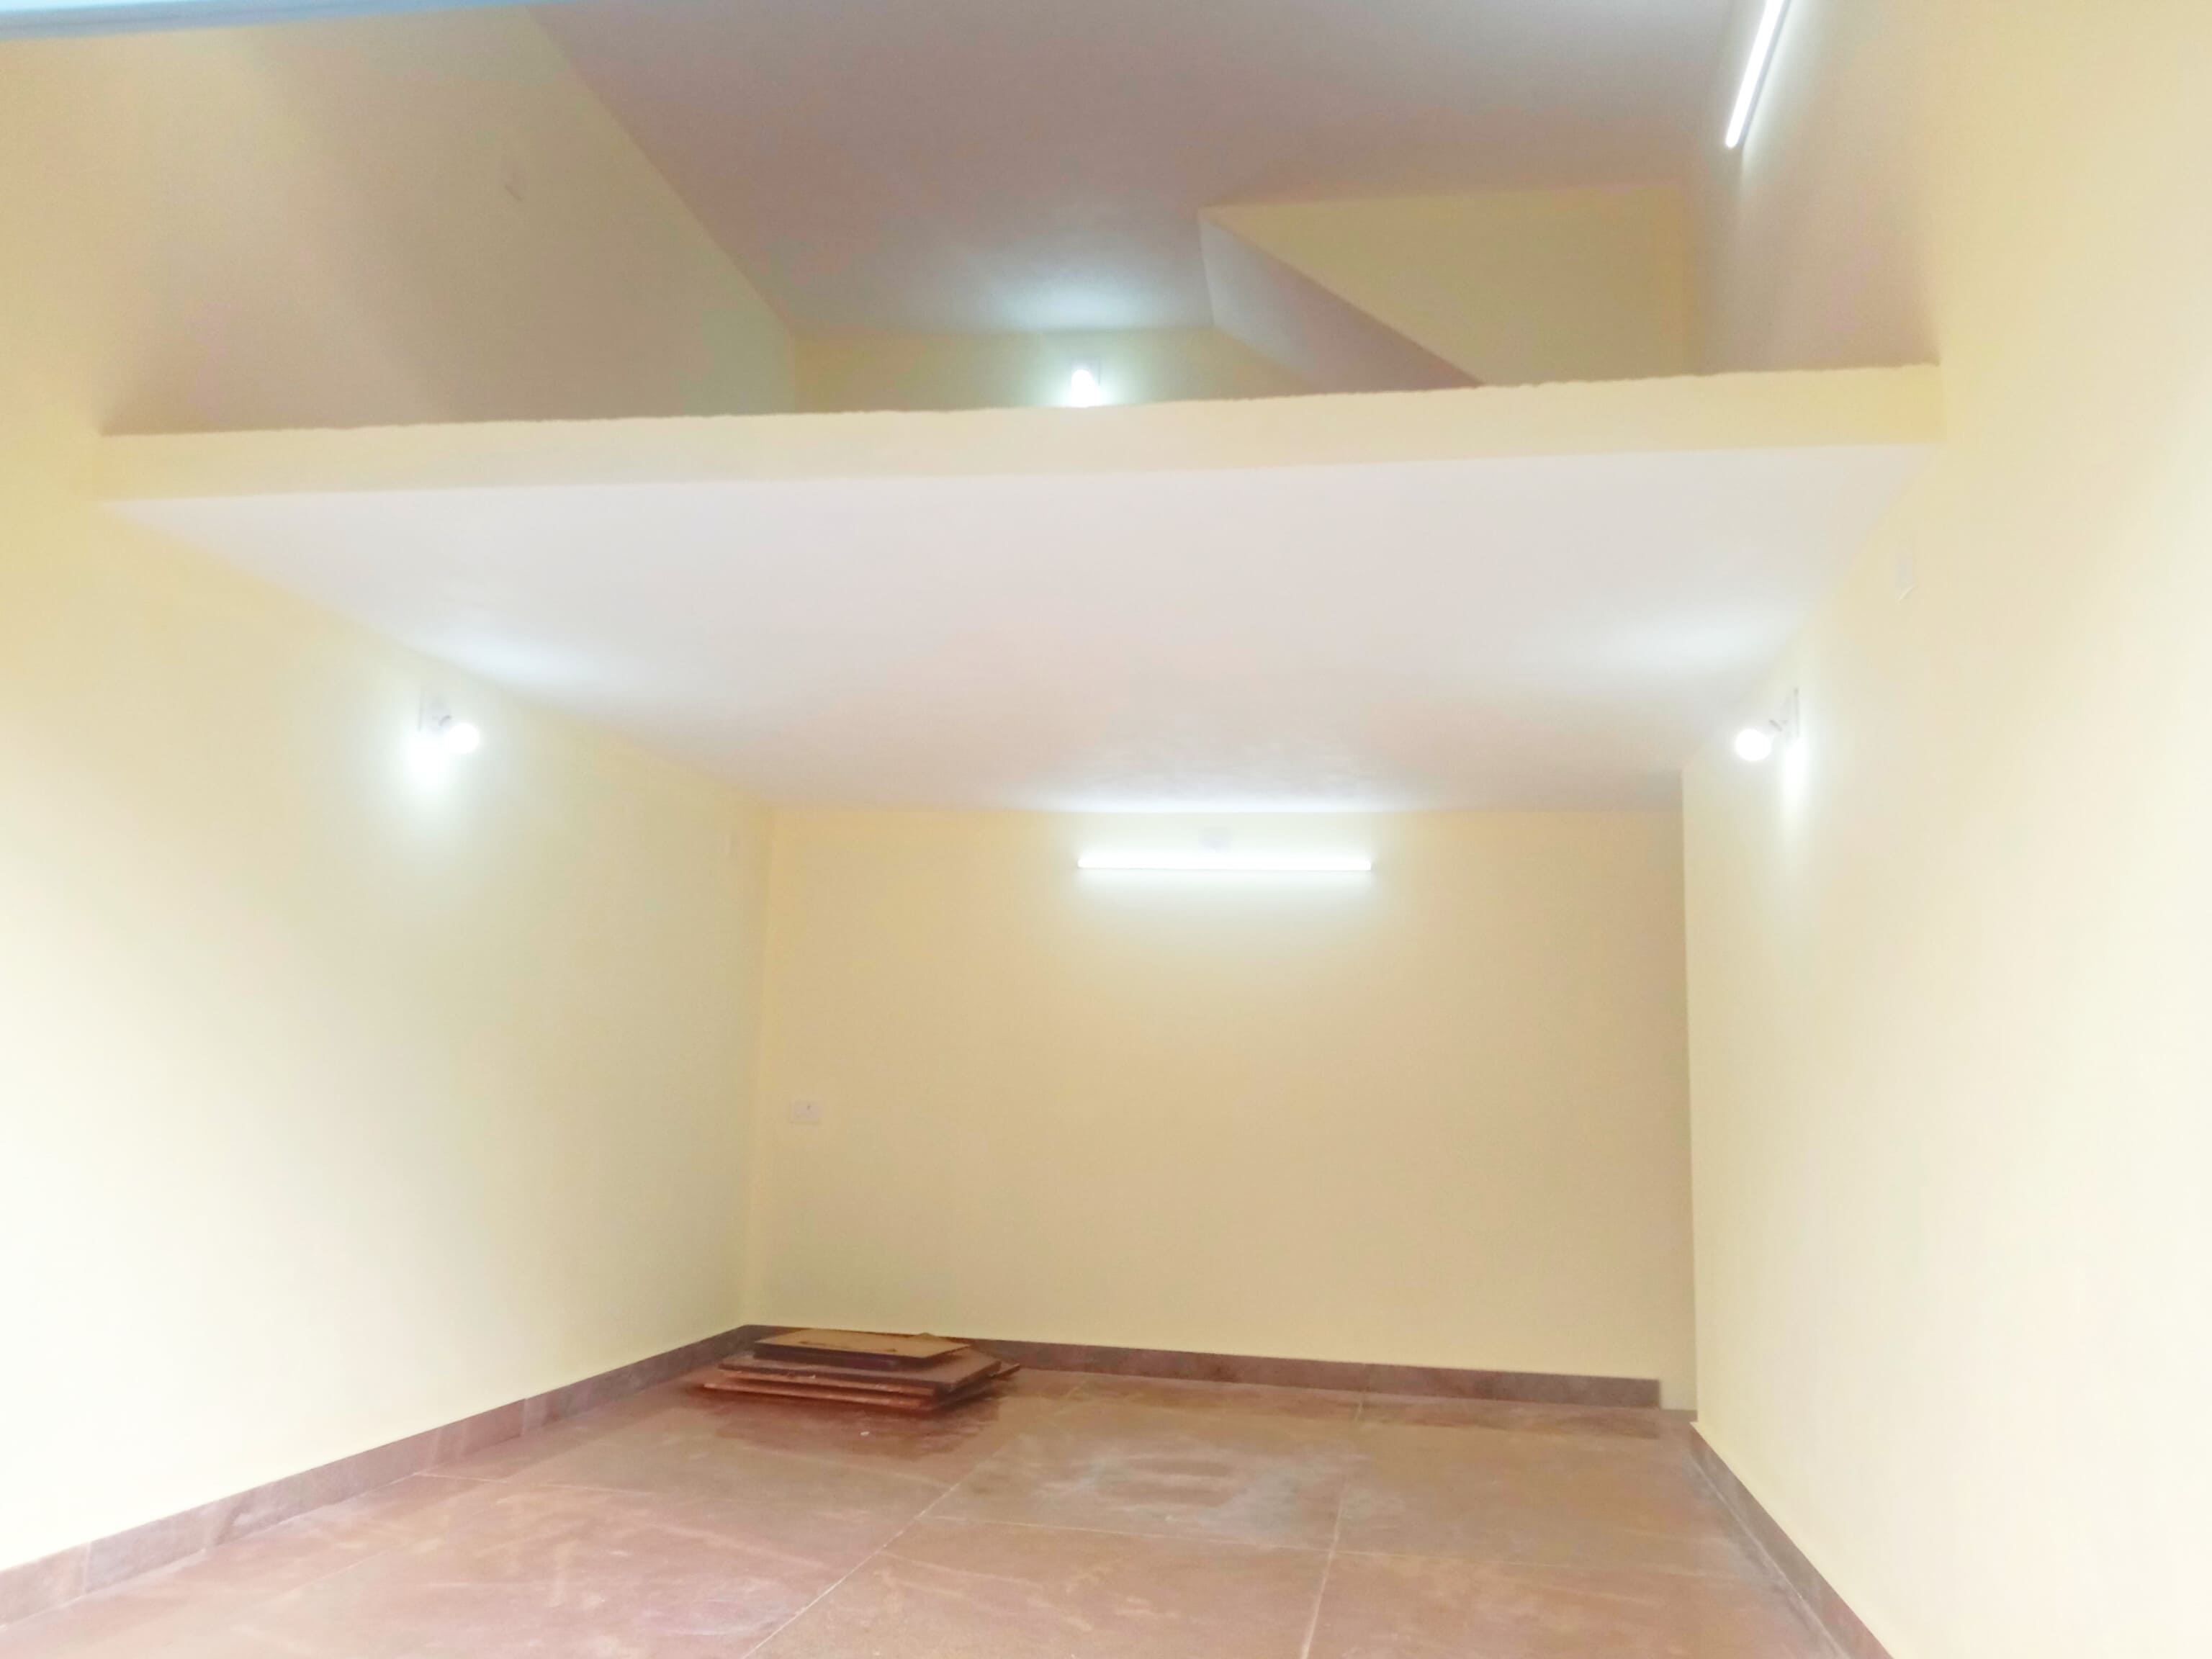 Shop for Rent 230 Sq. Feet at Mangalore